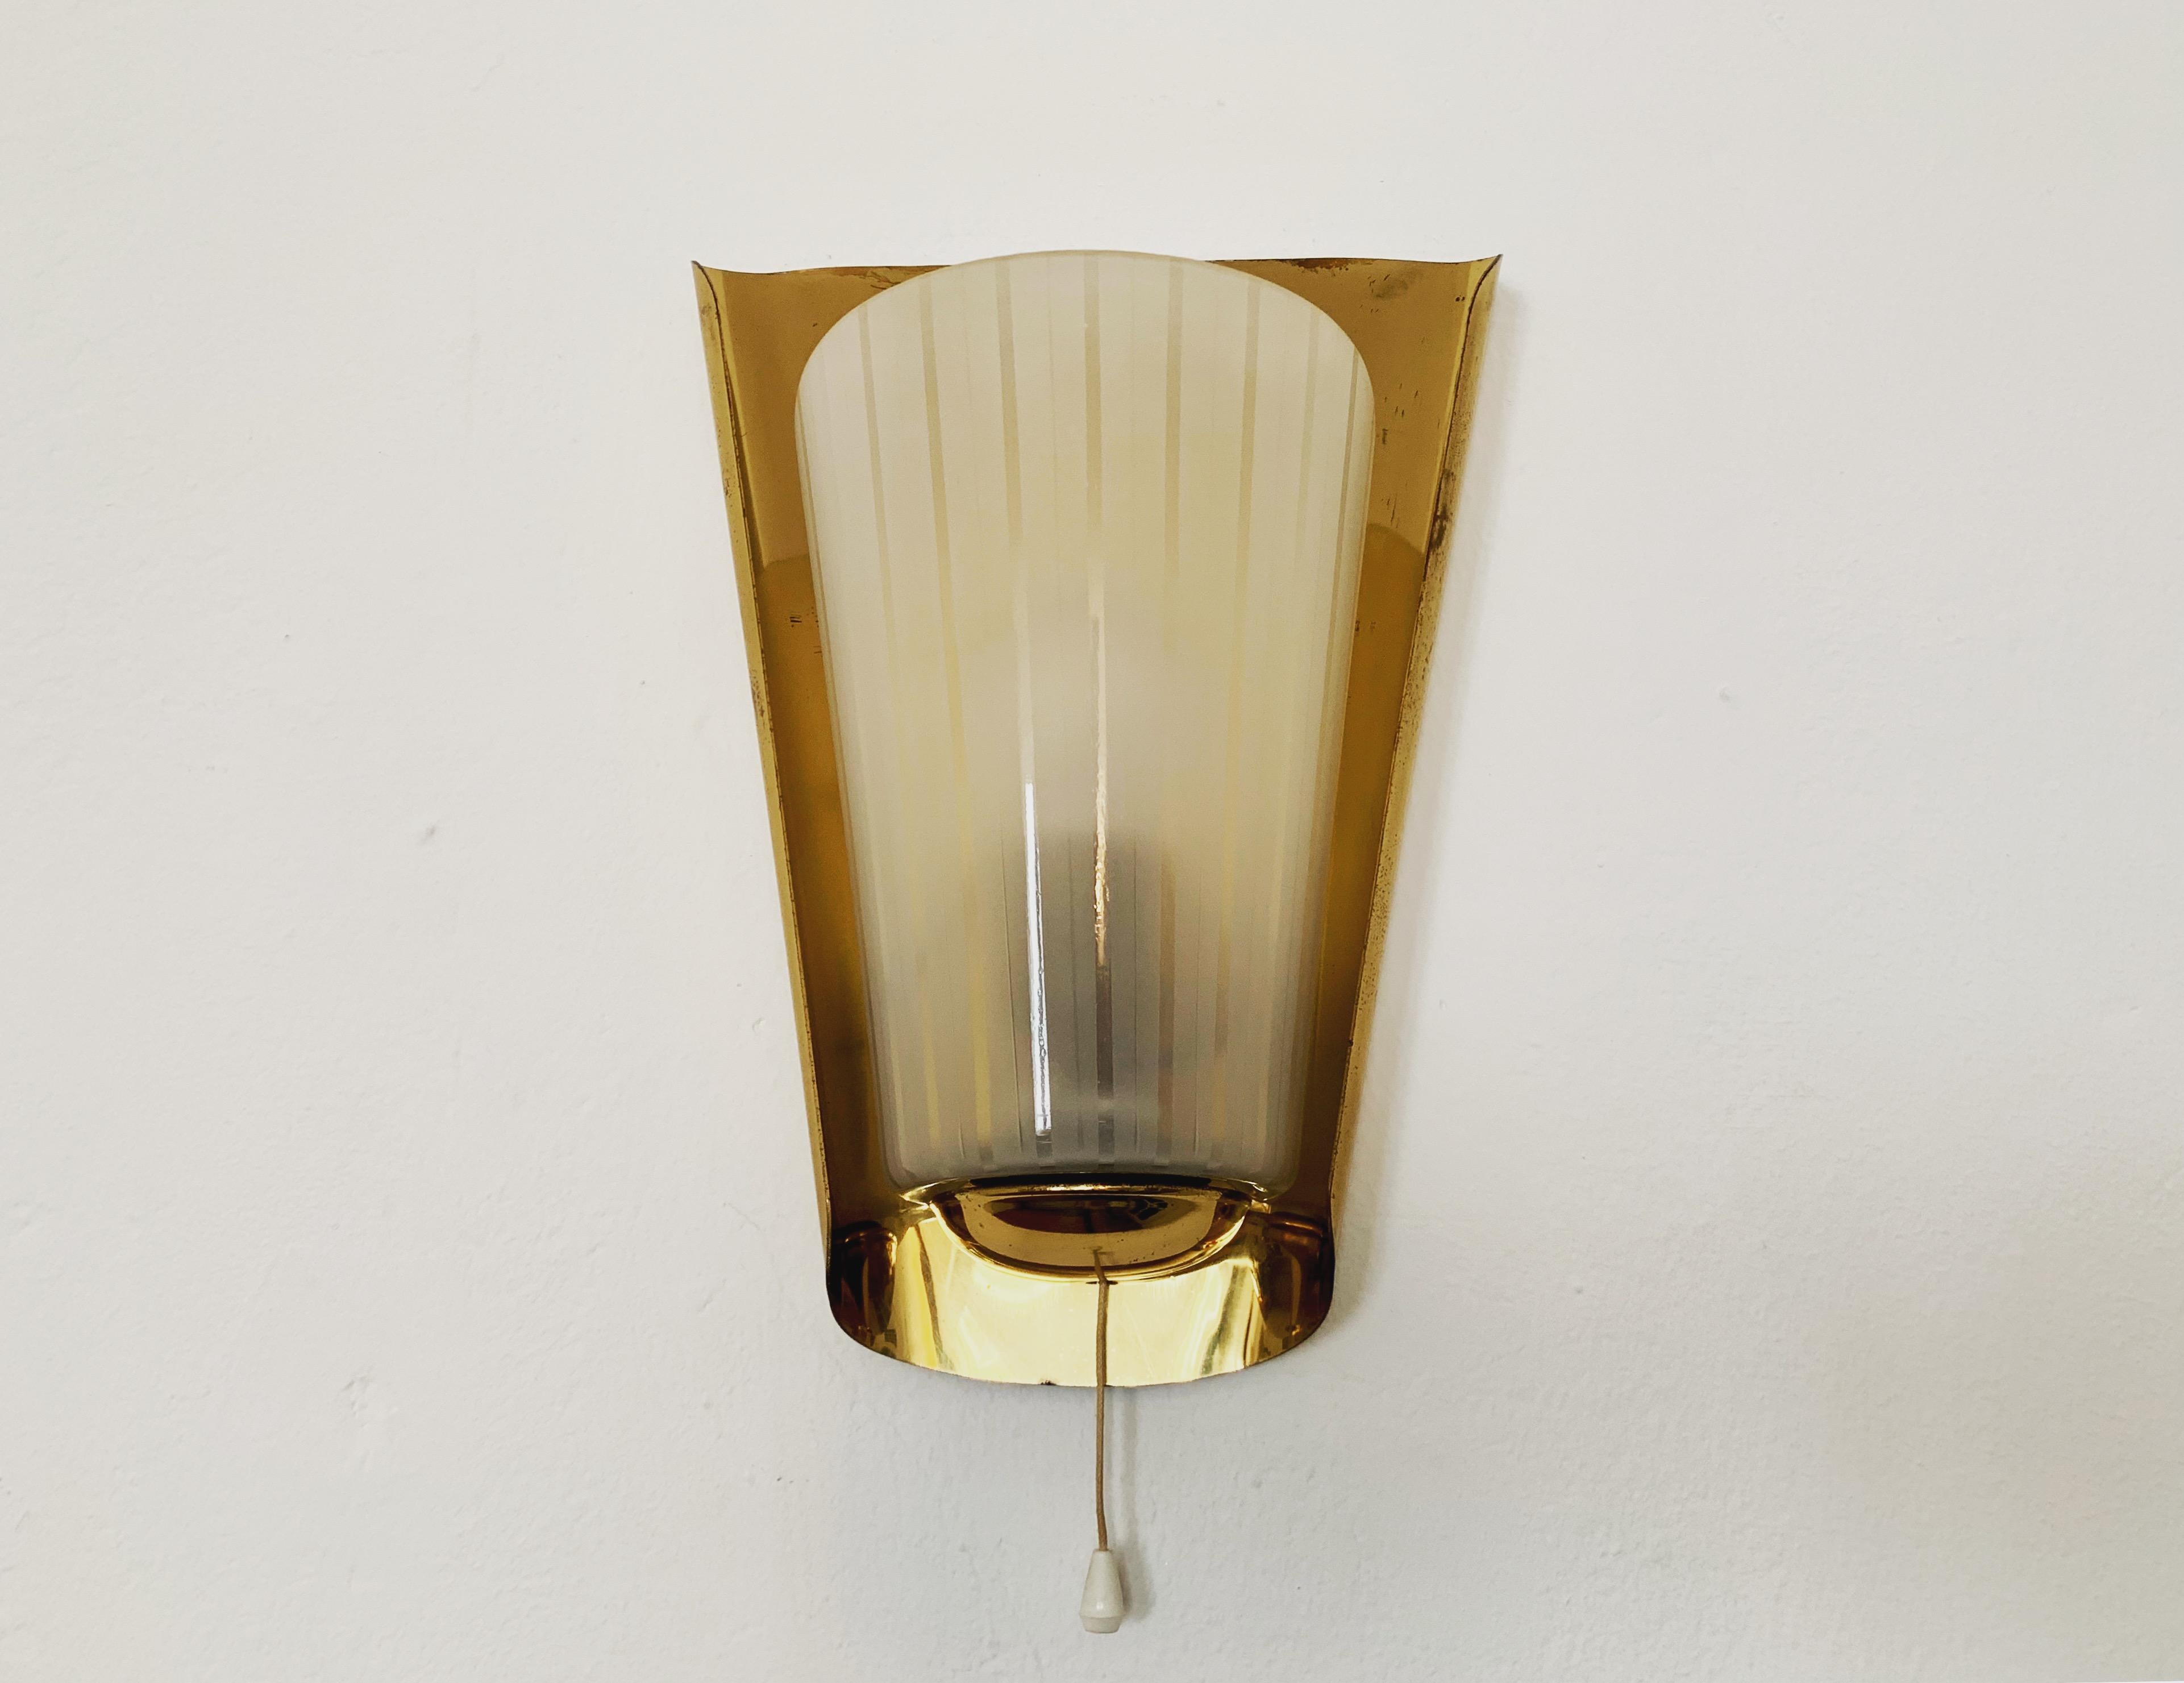 Very nice wall lamp from the 1950s.
Very elegant and classic shape.
The light diffusion is particularly beautiful due to the etched glass and the special brass edging.
A very nice cone of light is created on the wall.

Manufacturer: Peill and